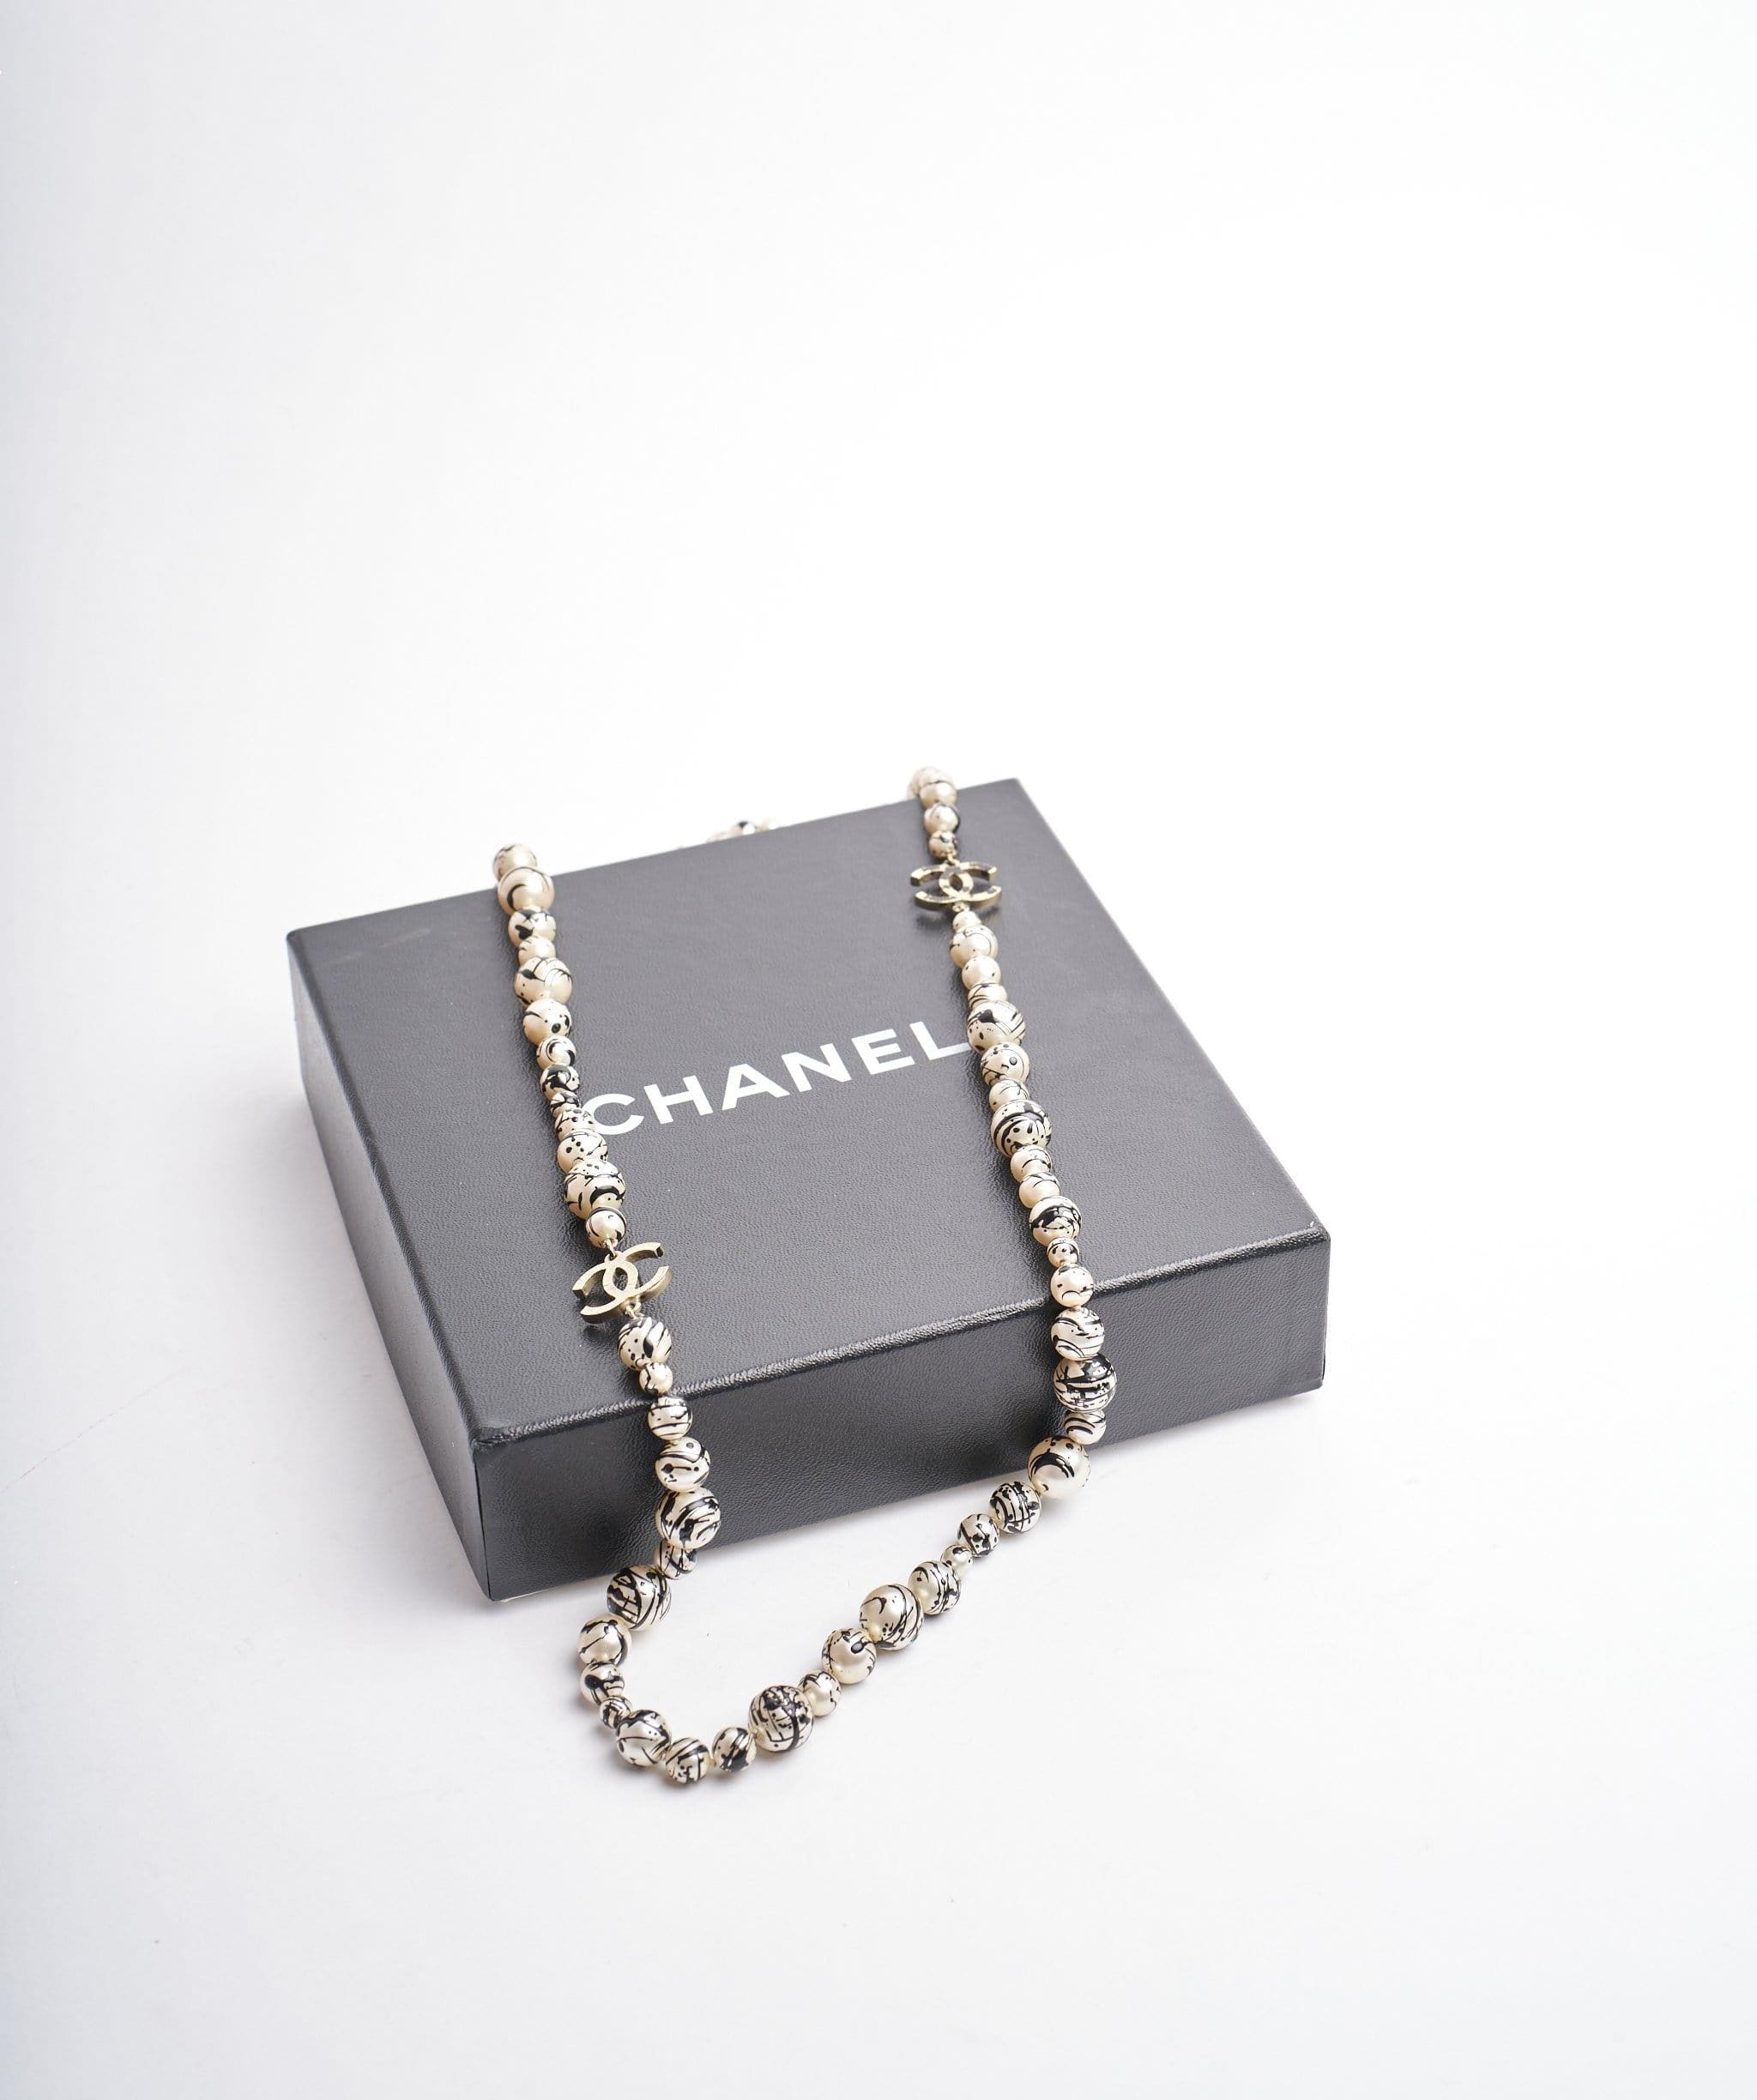 Chanel Chanel pearl necklace black and white